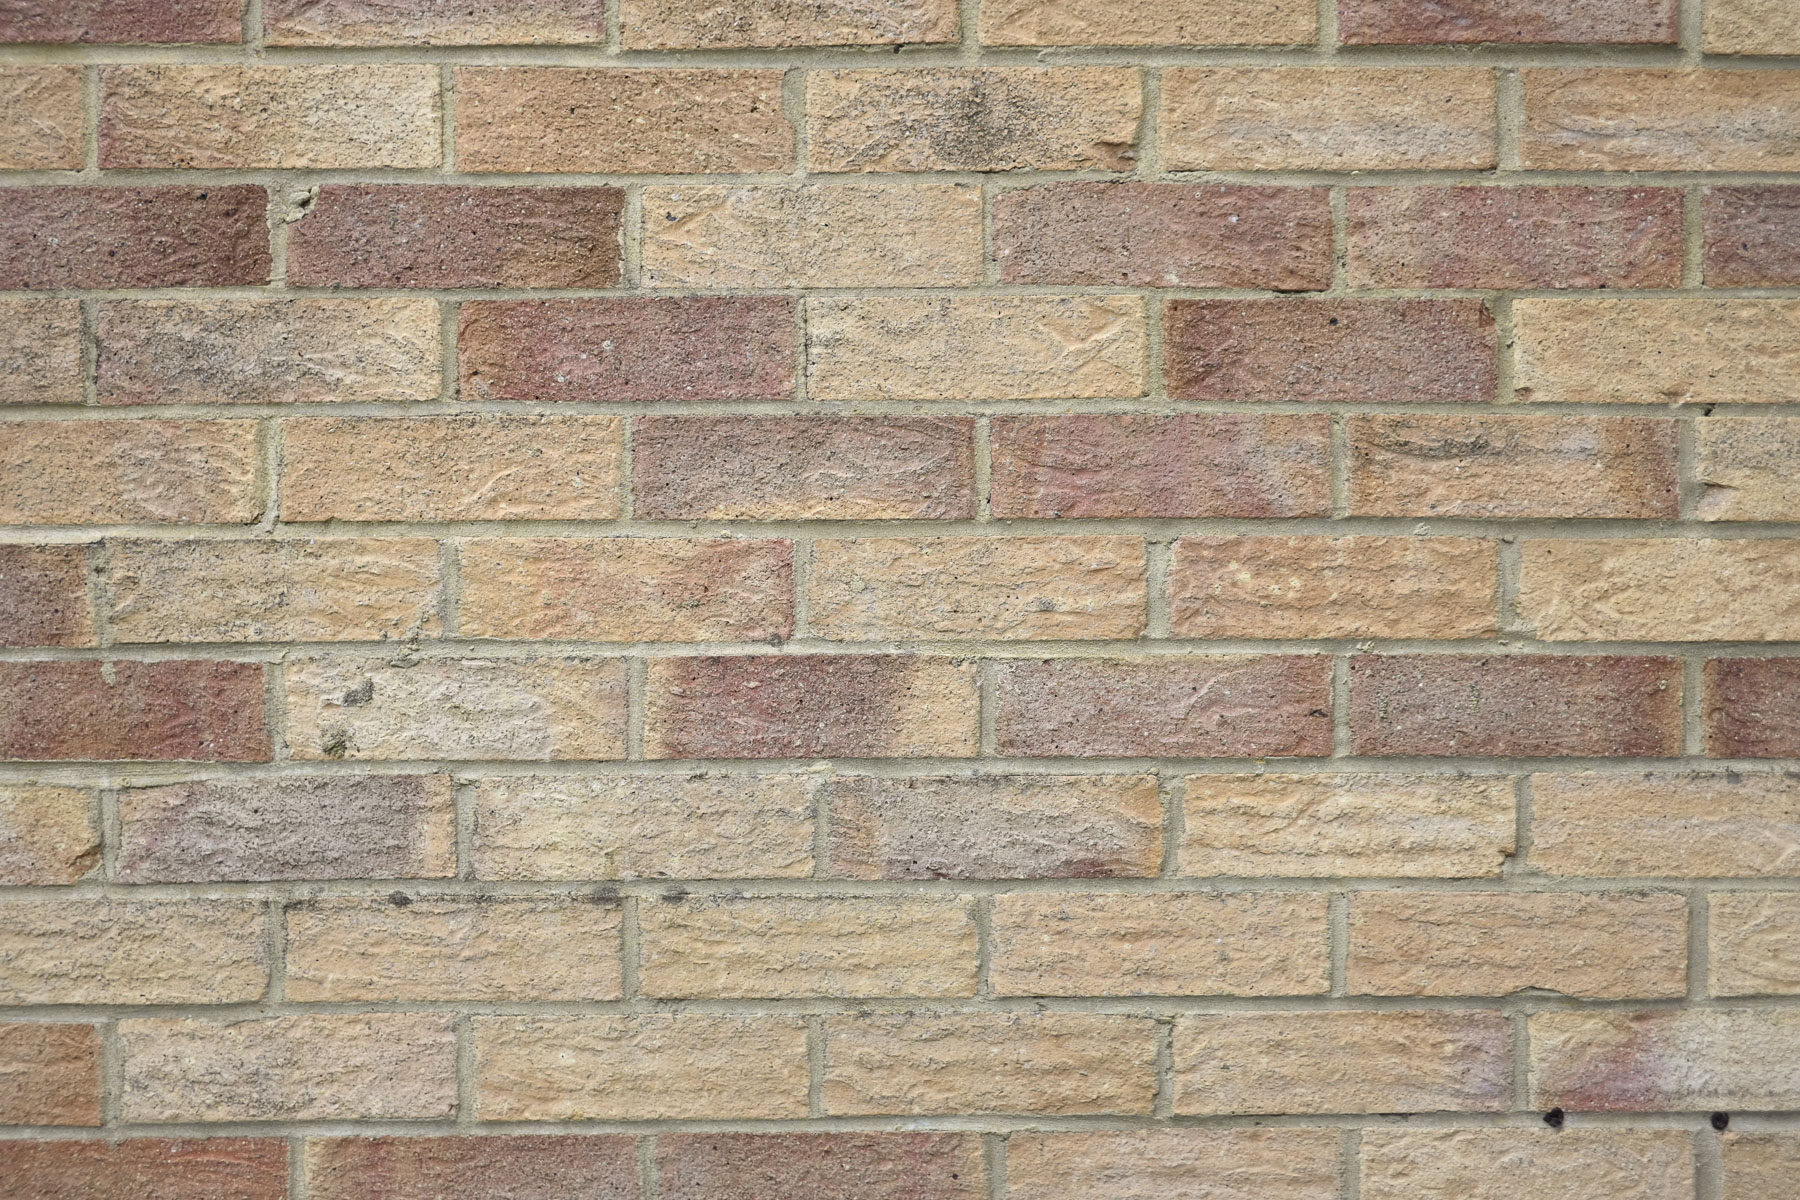 Image of a brick wall taken with the Nikkor Z DX 24mm f/1.7 lens to show vignetting correction